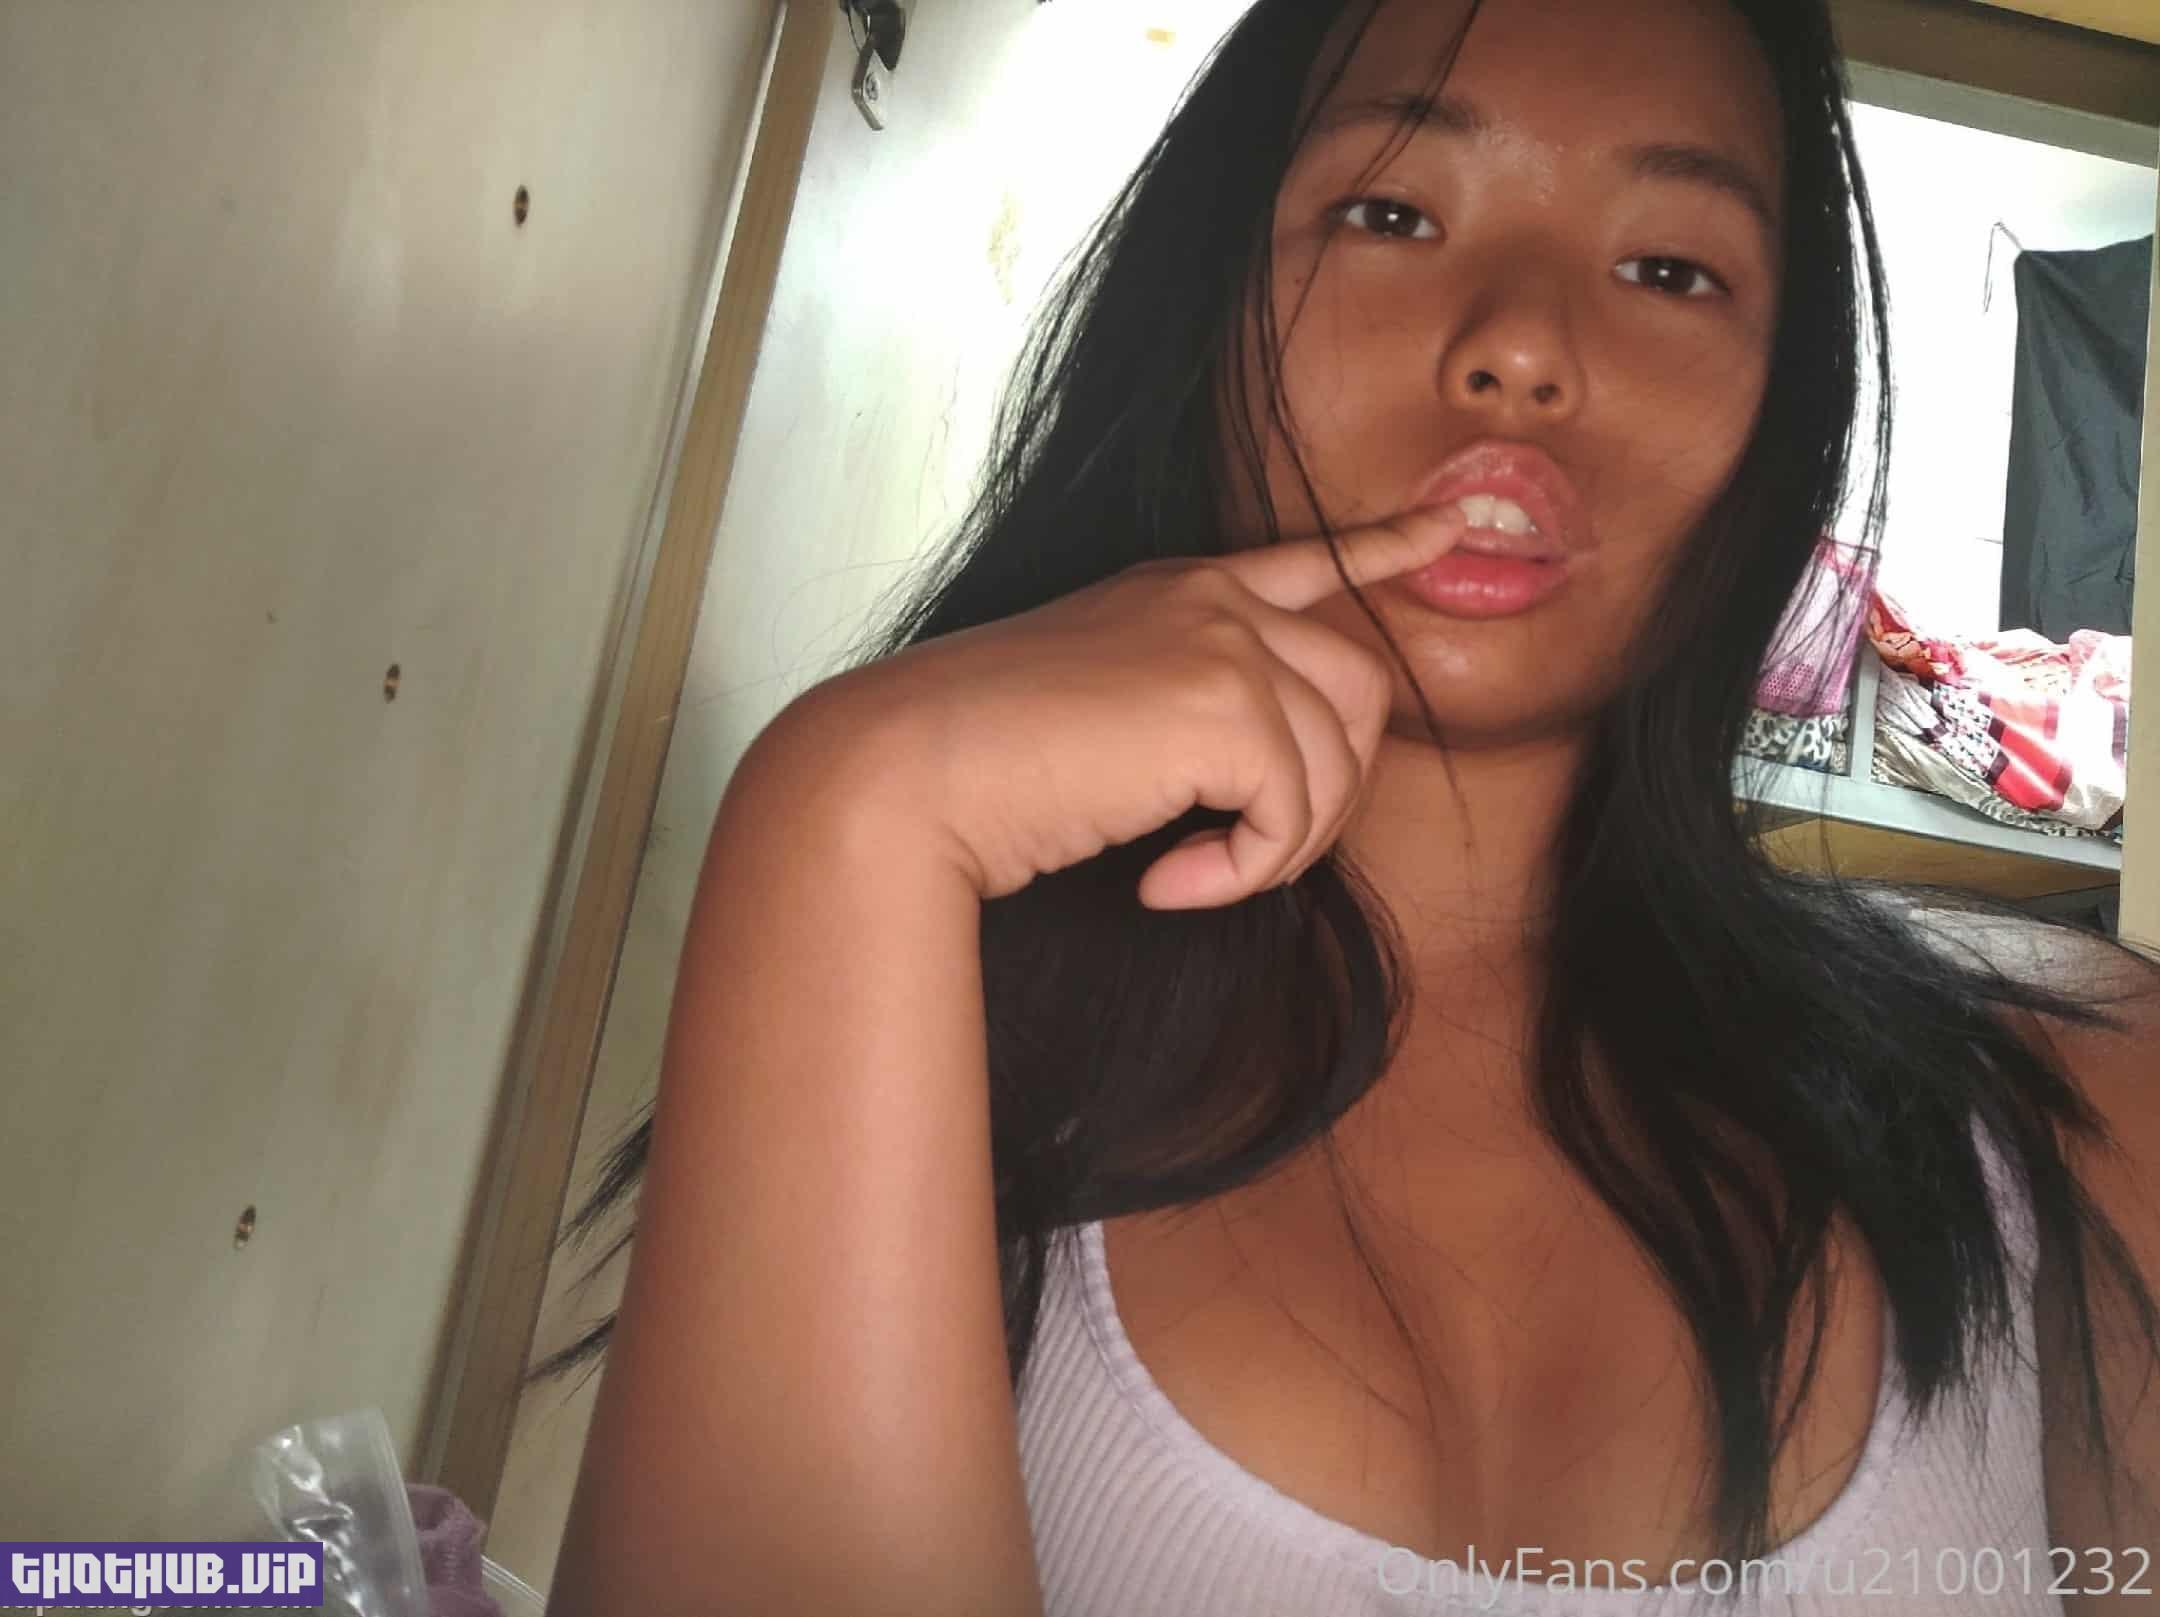 1661065079 167 Yoyowooh %E2%80%93 Thick Asian Onlyfans Nudes